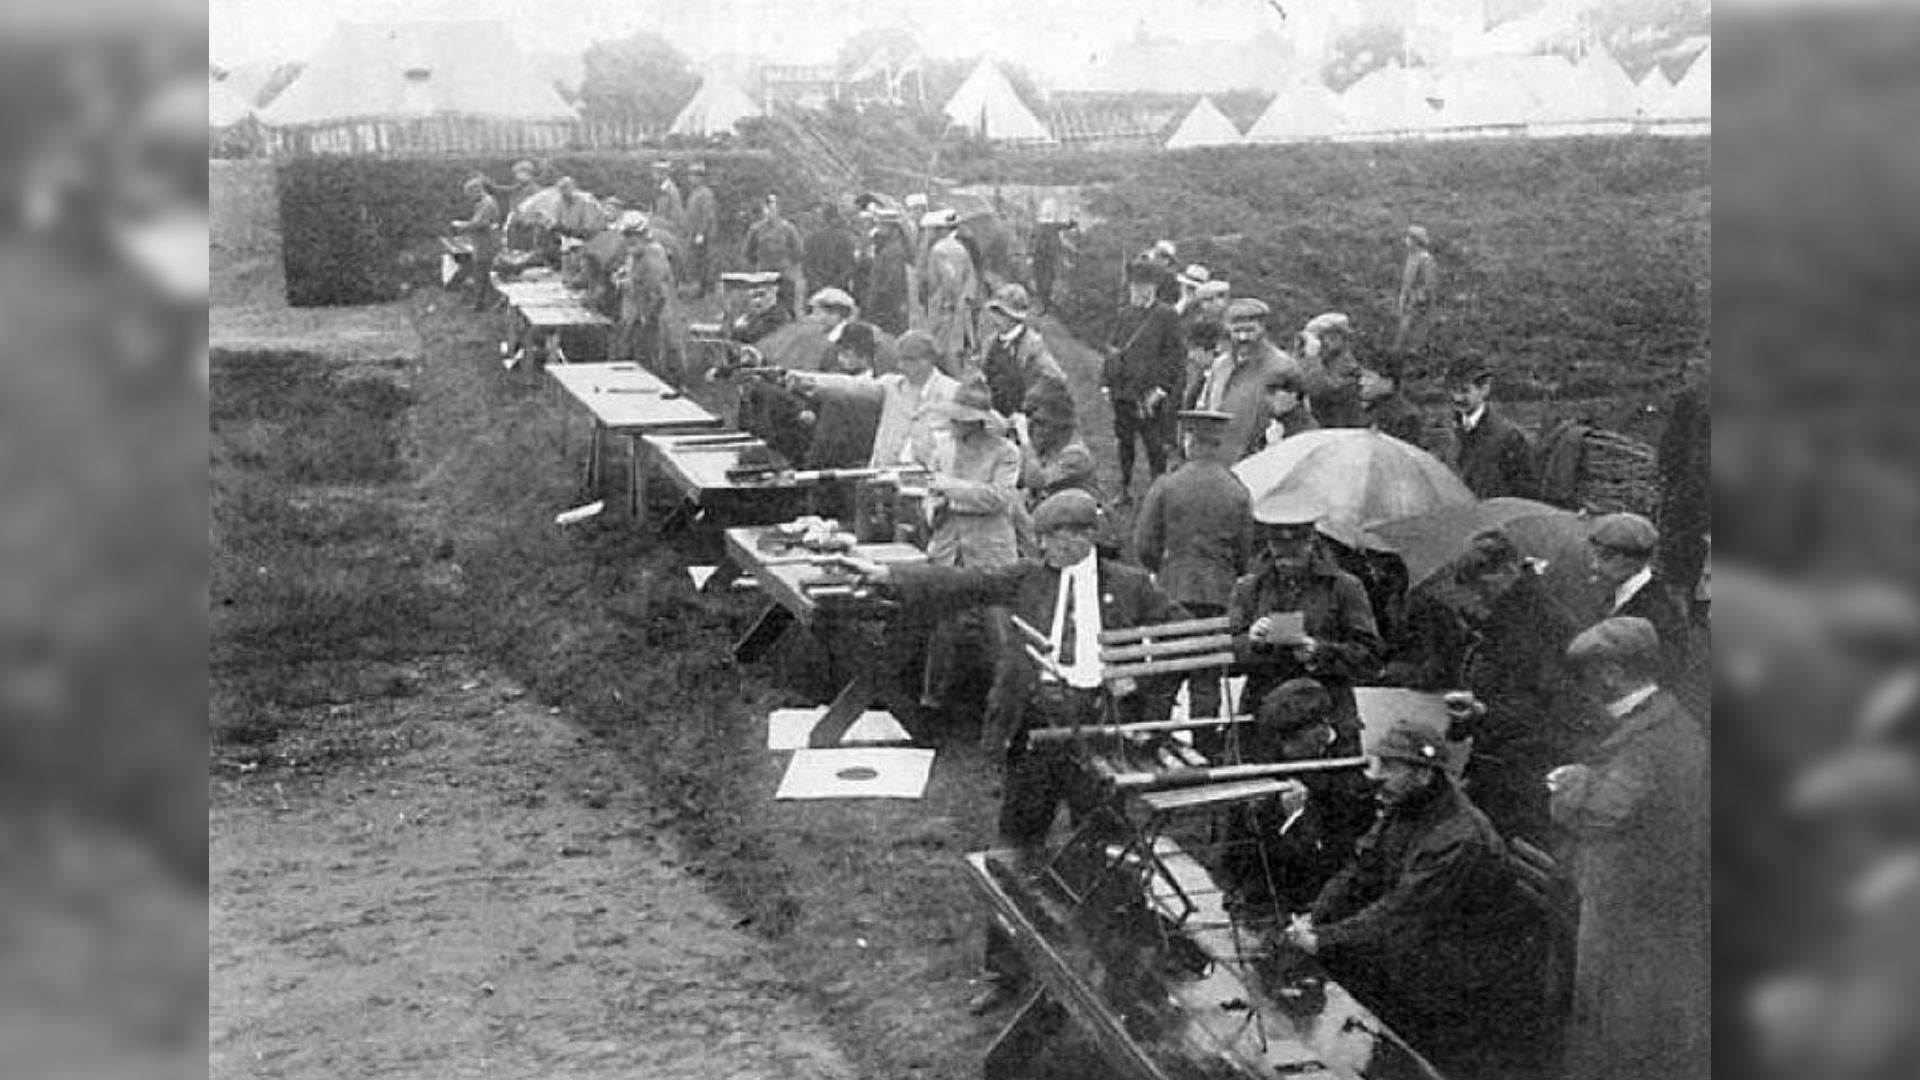 1908 Olympic pistol and revolver events at Bisley